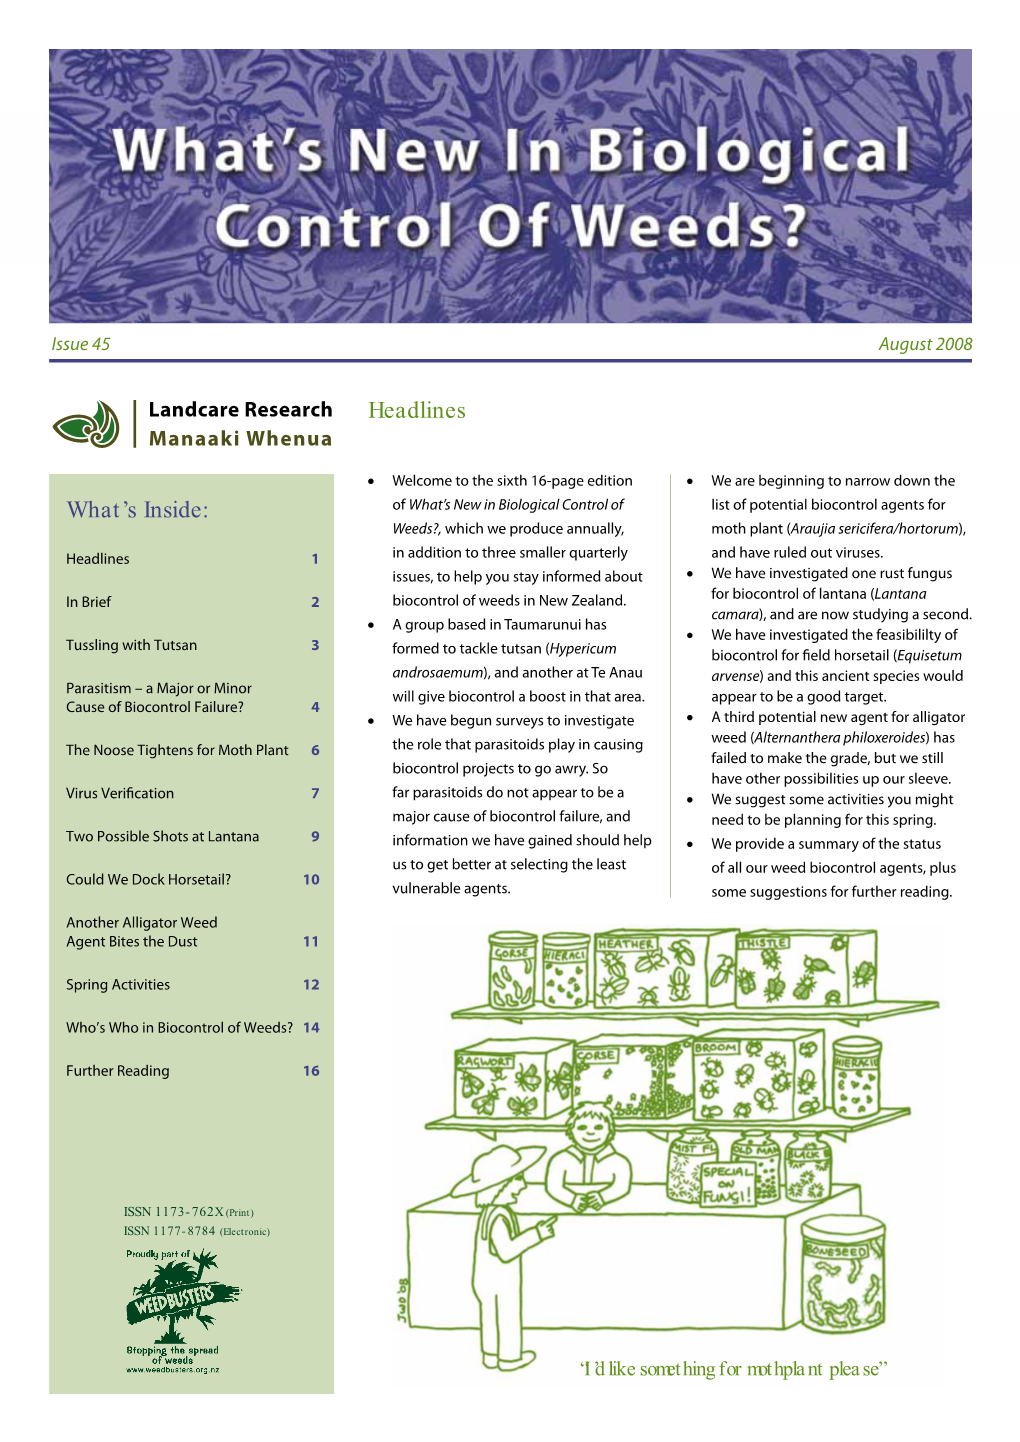 What's New in Biological Control of Weeds